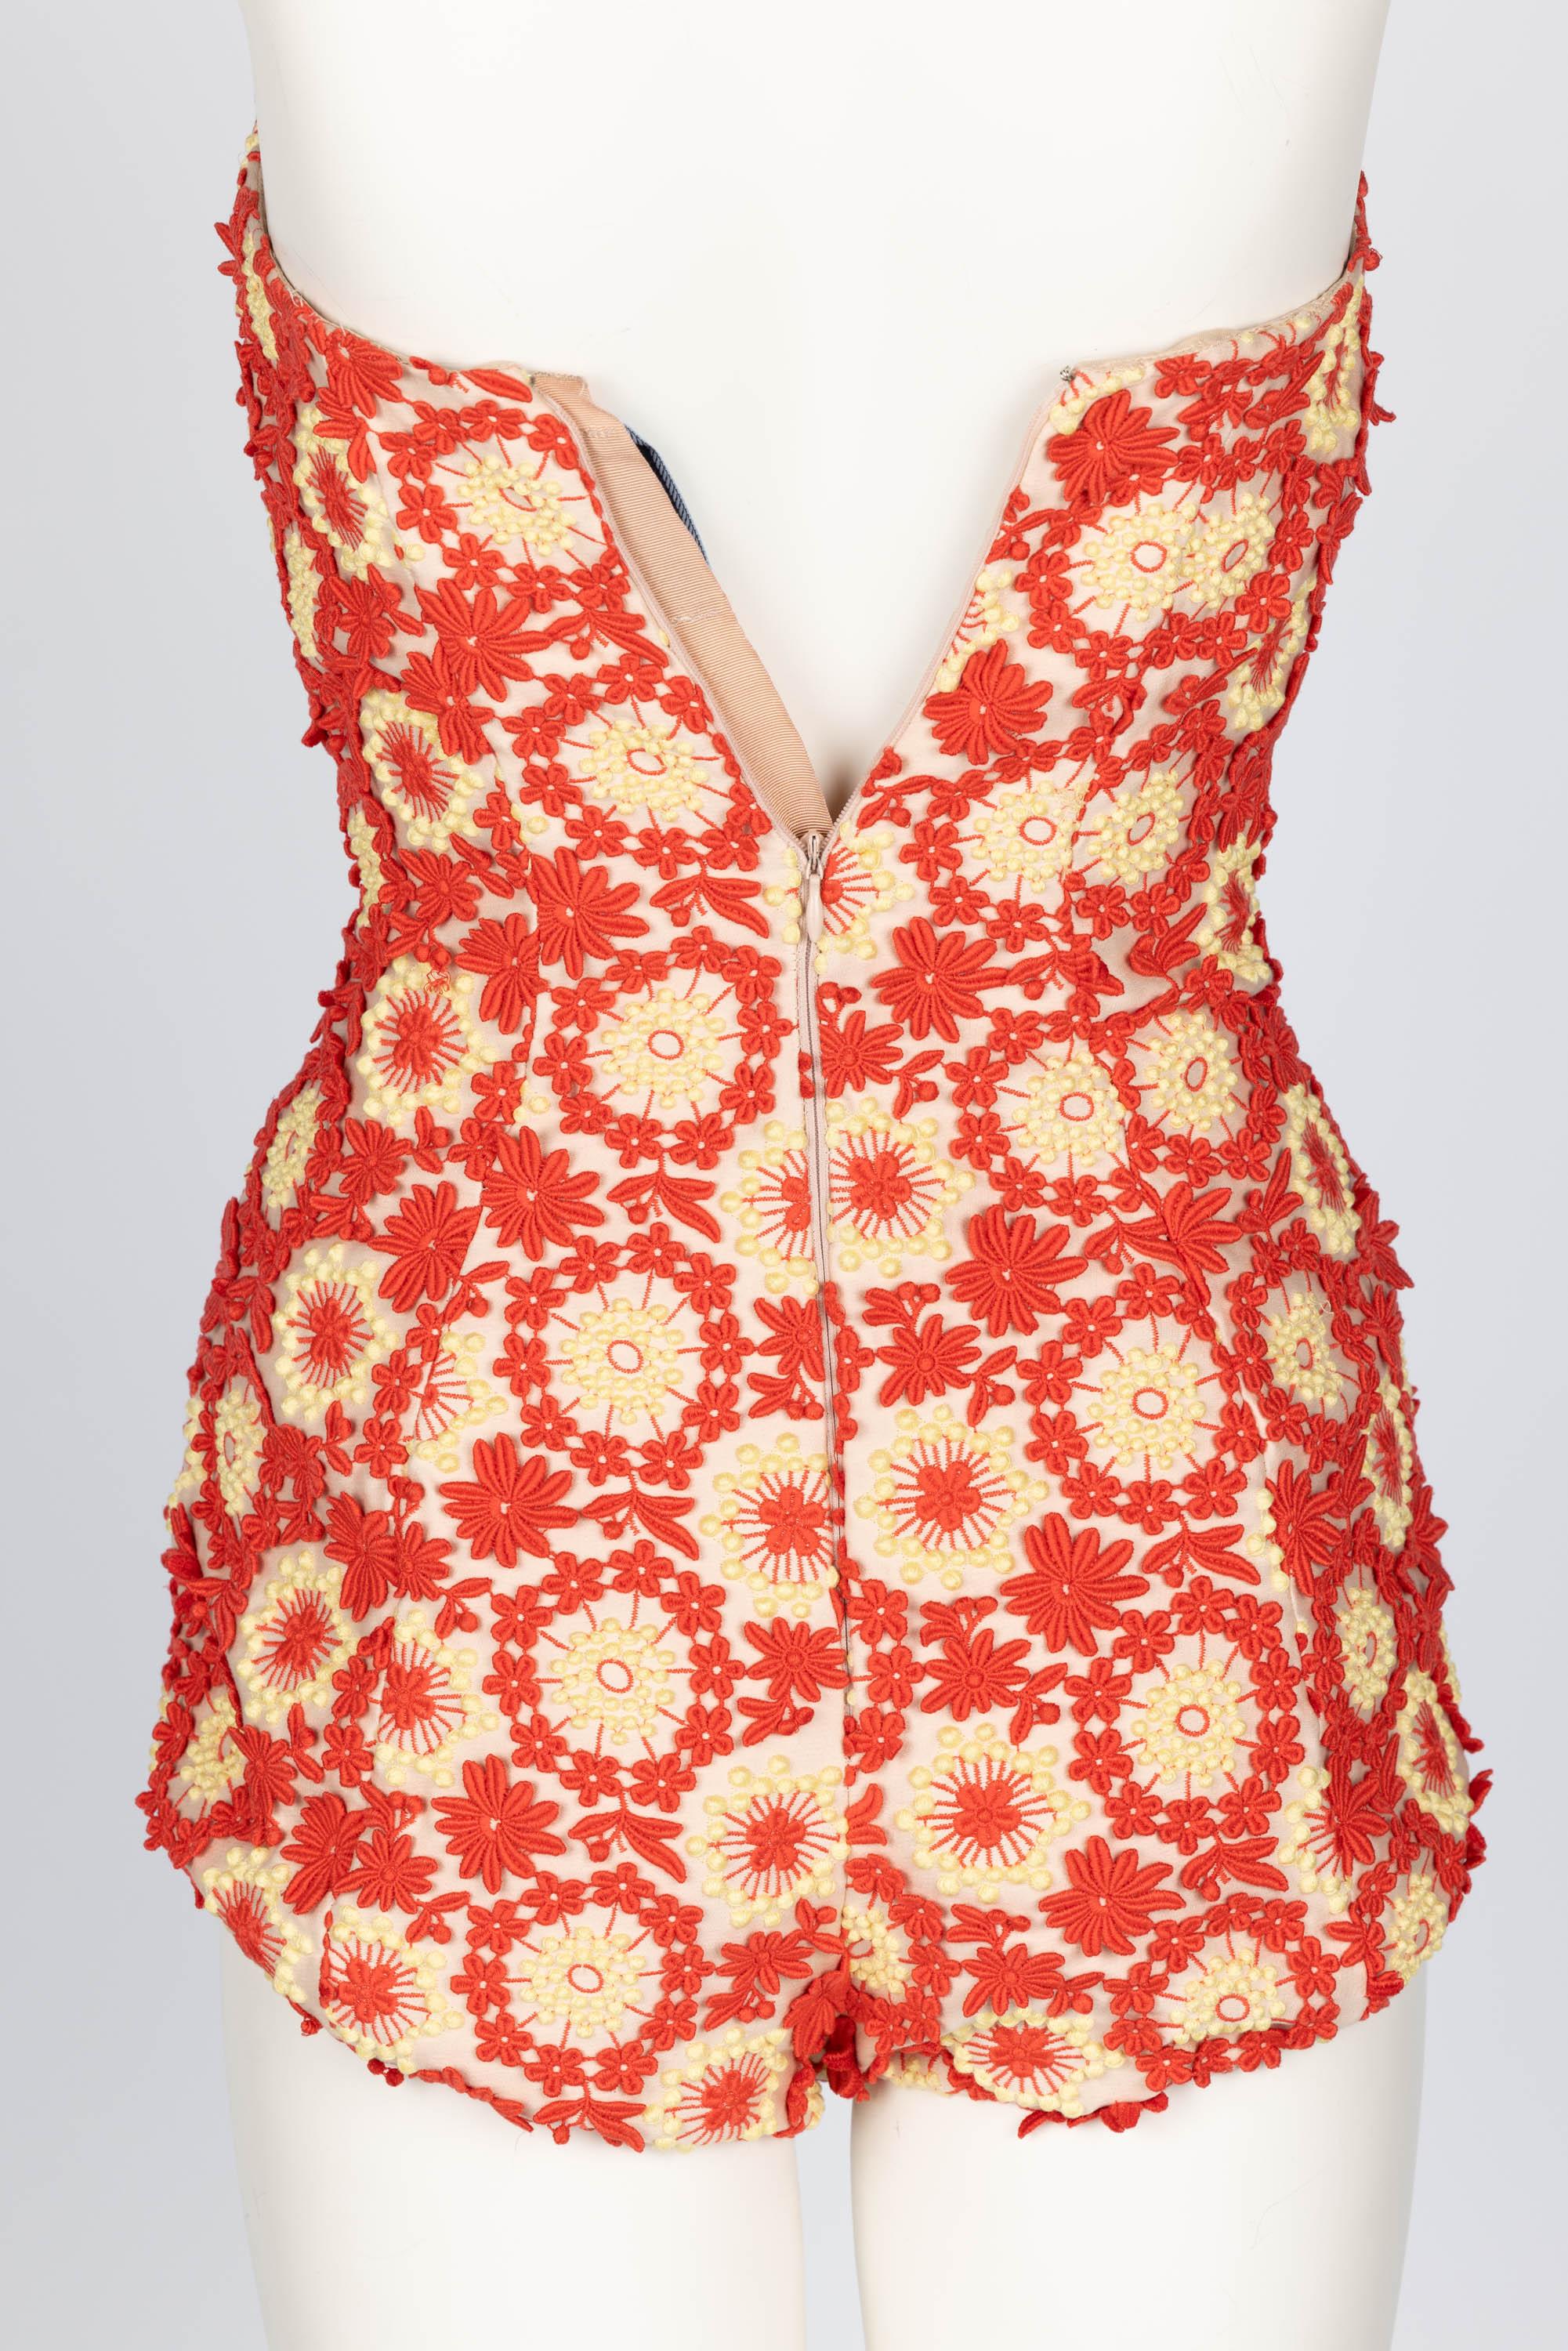 Prada Most Wanted Spring 2012 Floral Embroidered Pinup Bodysuit For Sale 2